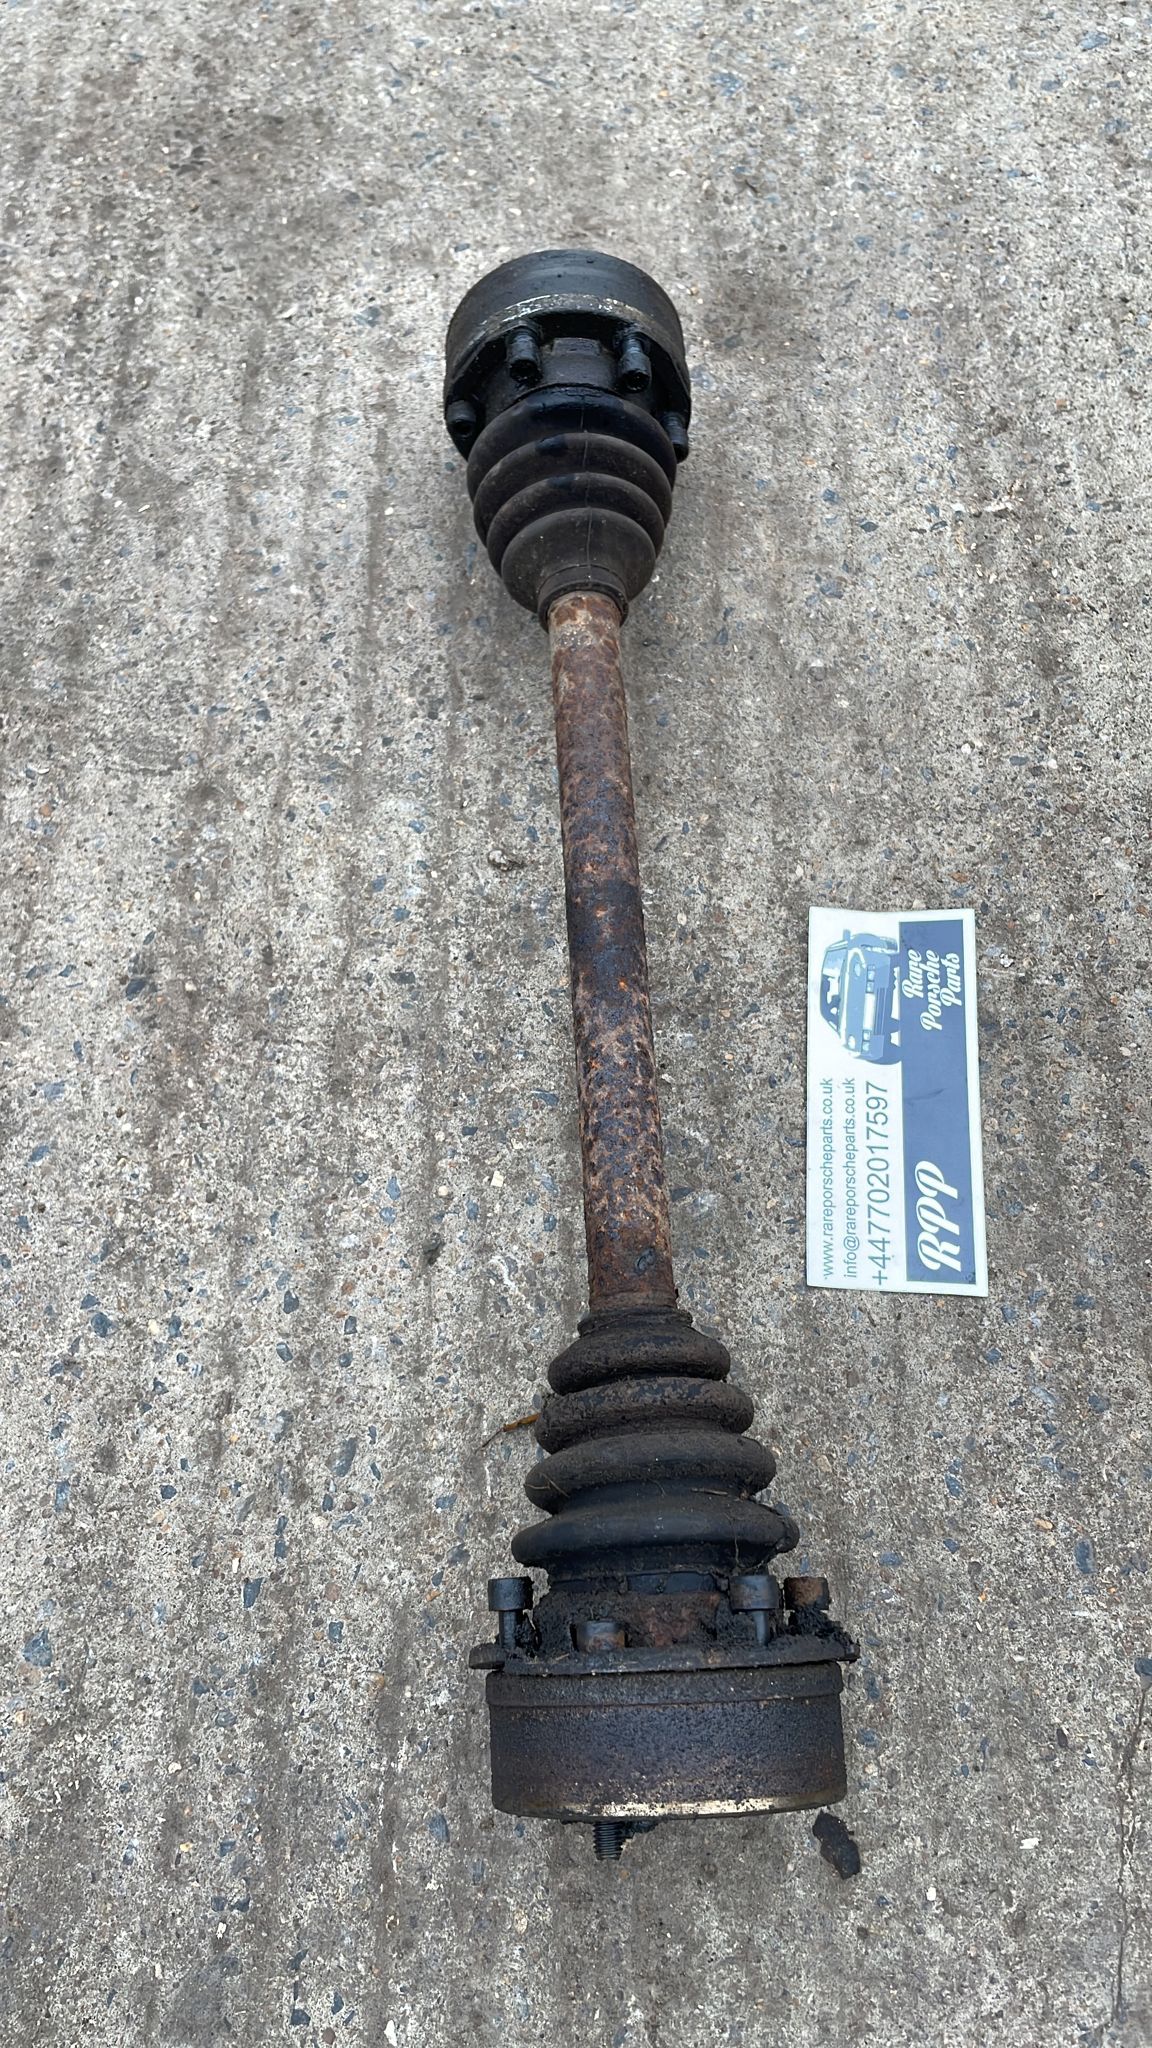 Porsche 924S automatic driveshaft, used